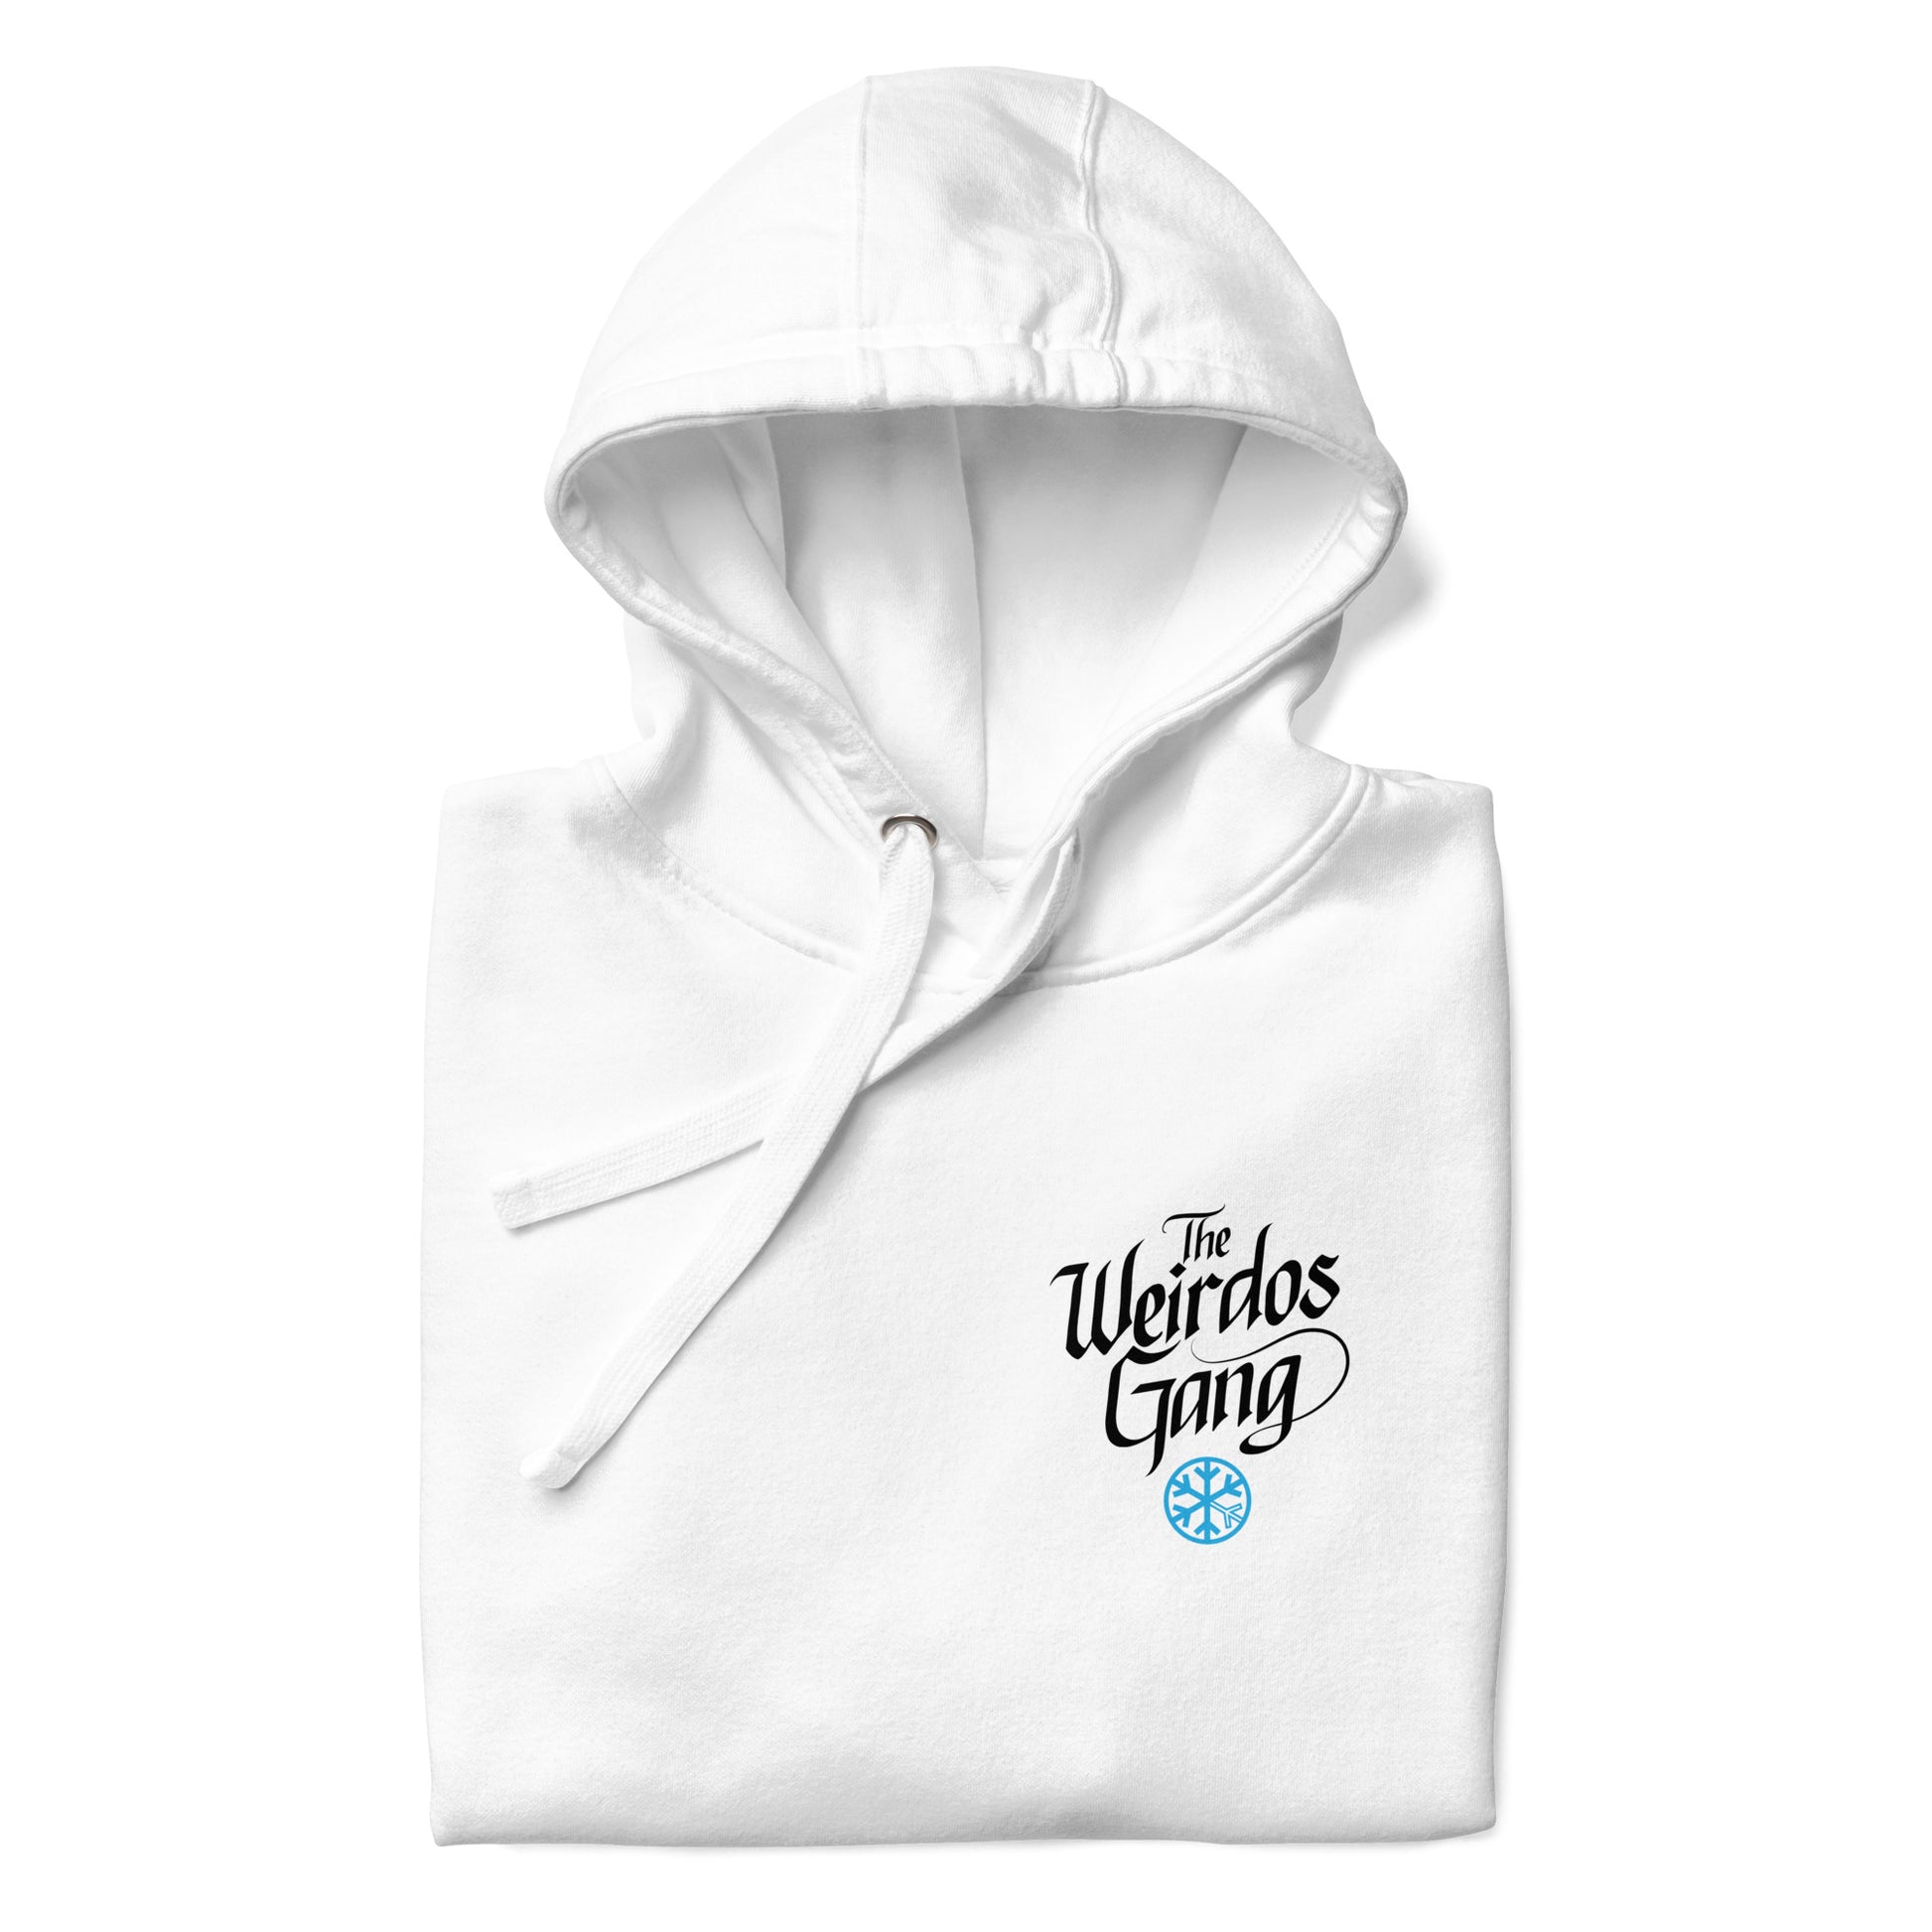 folded Weirdos Gang lettering hoodie white by B.Different Clothing street art graffiti inspired brand for weirdos, outsiders, and misfits.